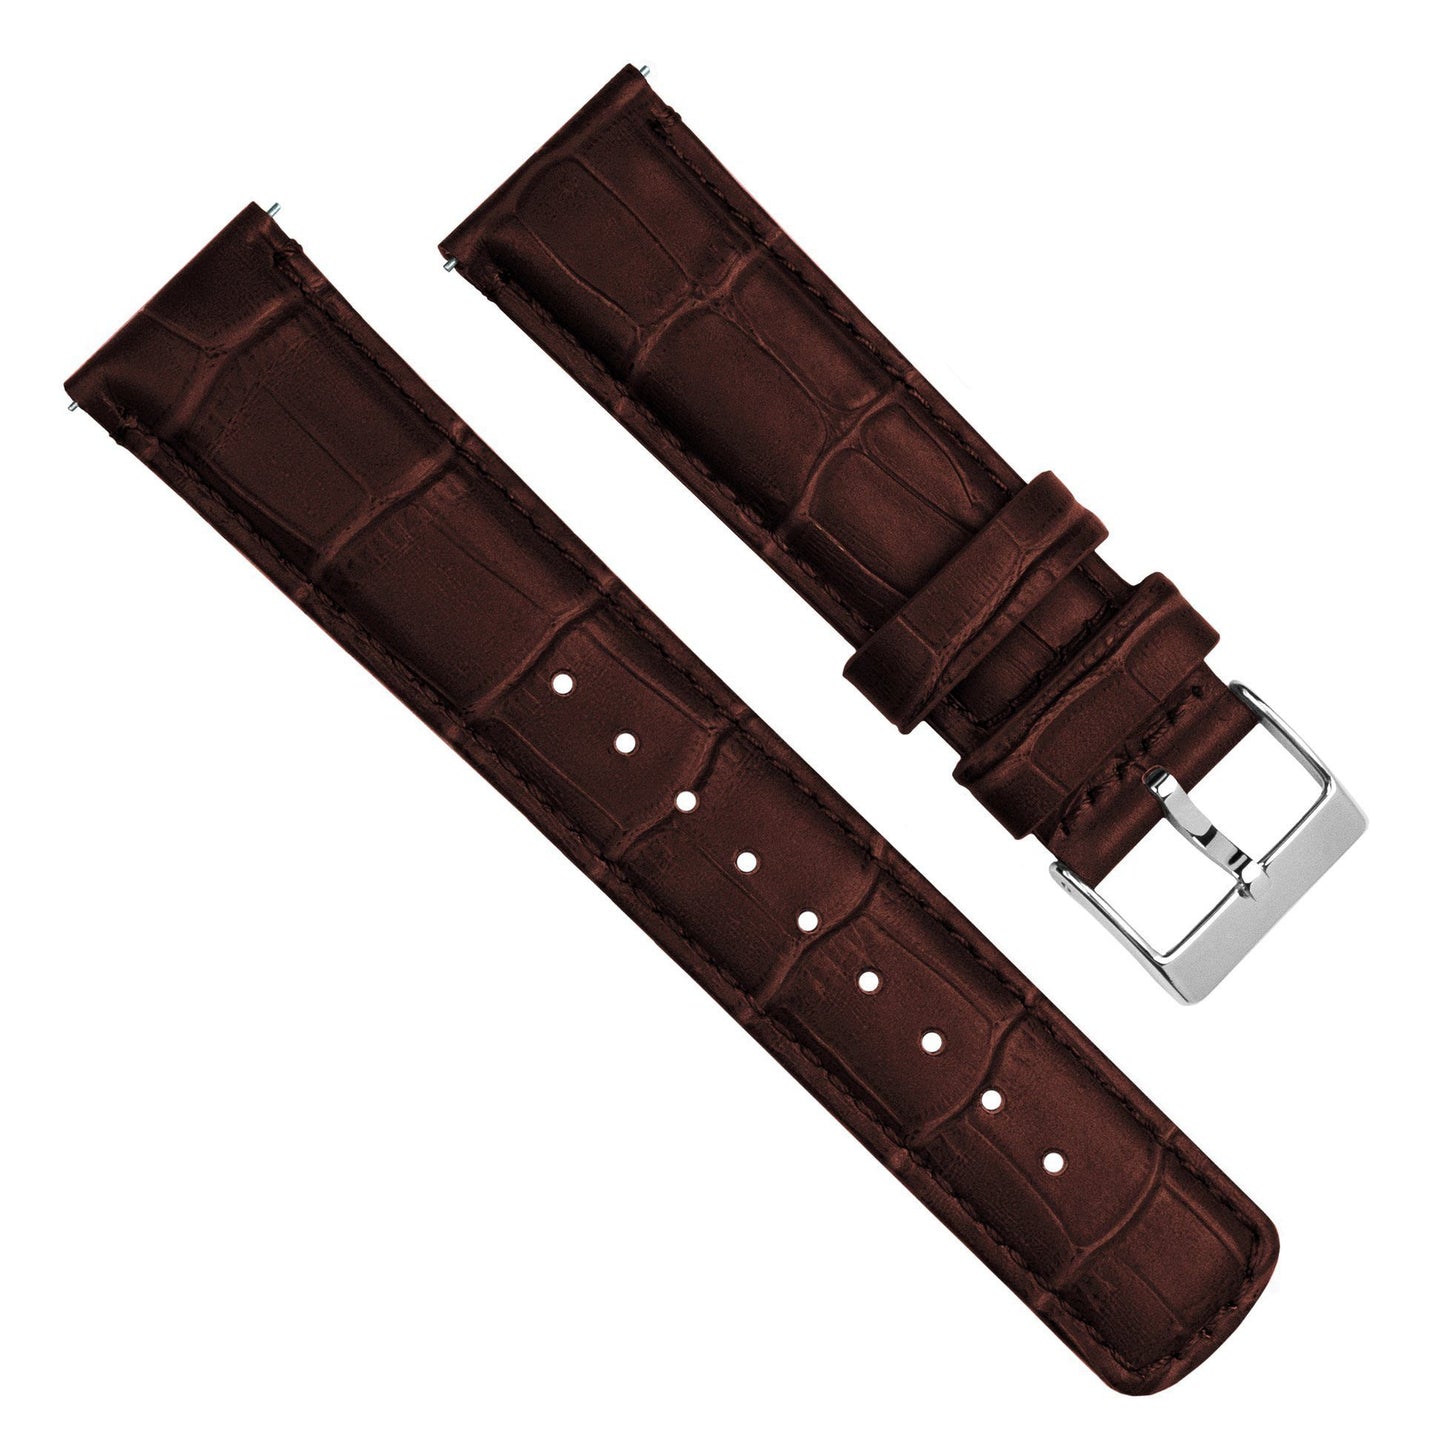 Withings Nokia Activité and Steel HR | Coffee Brown Alligator Grain Leather - Barton Watch Bands